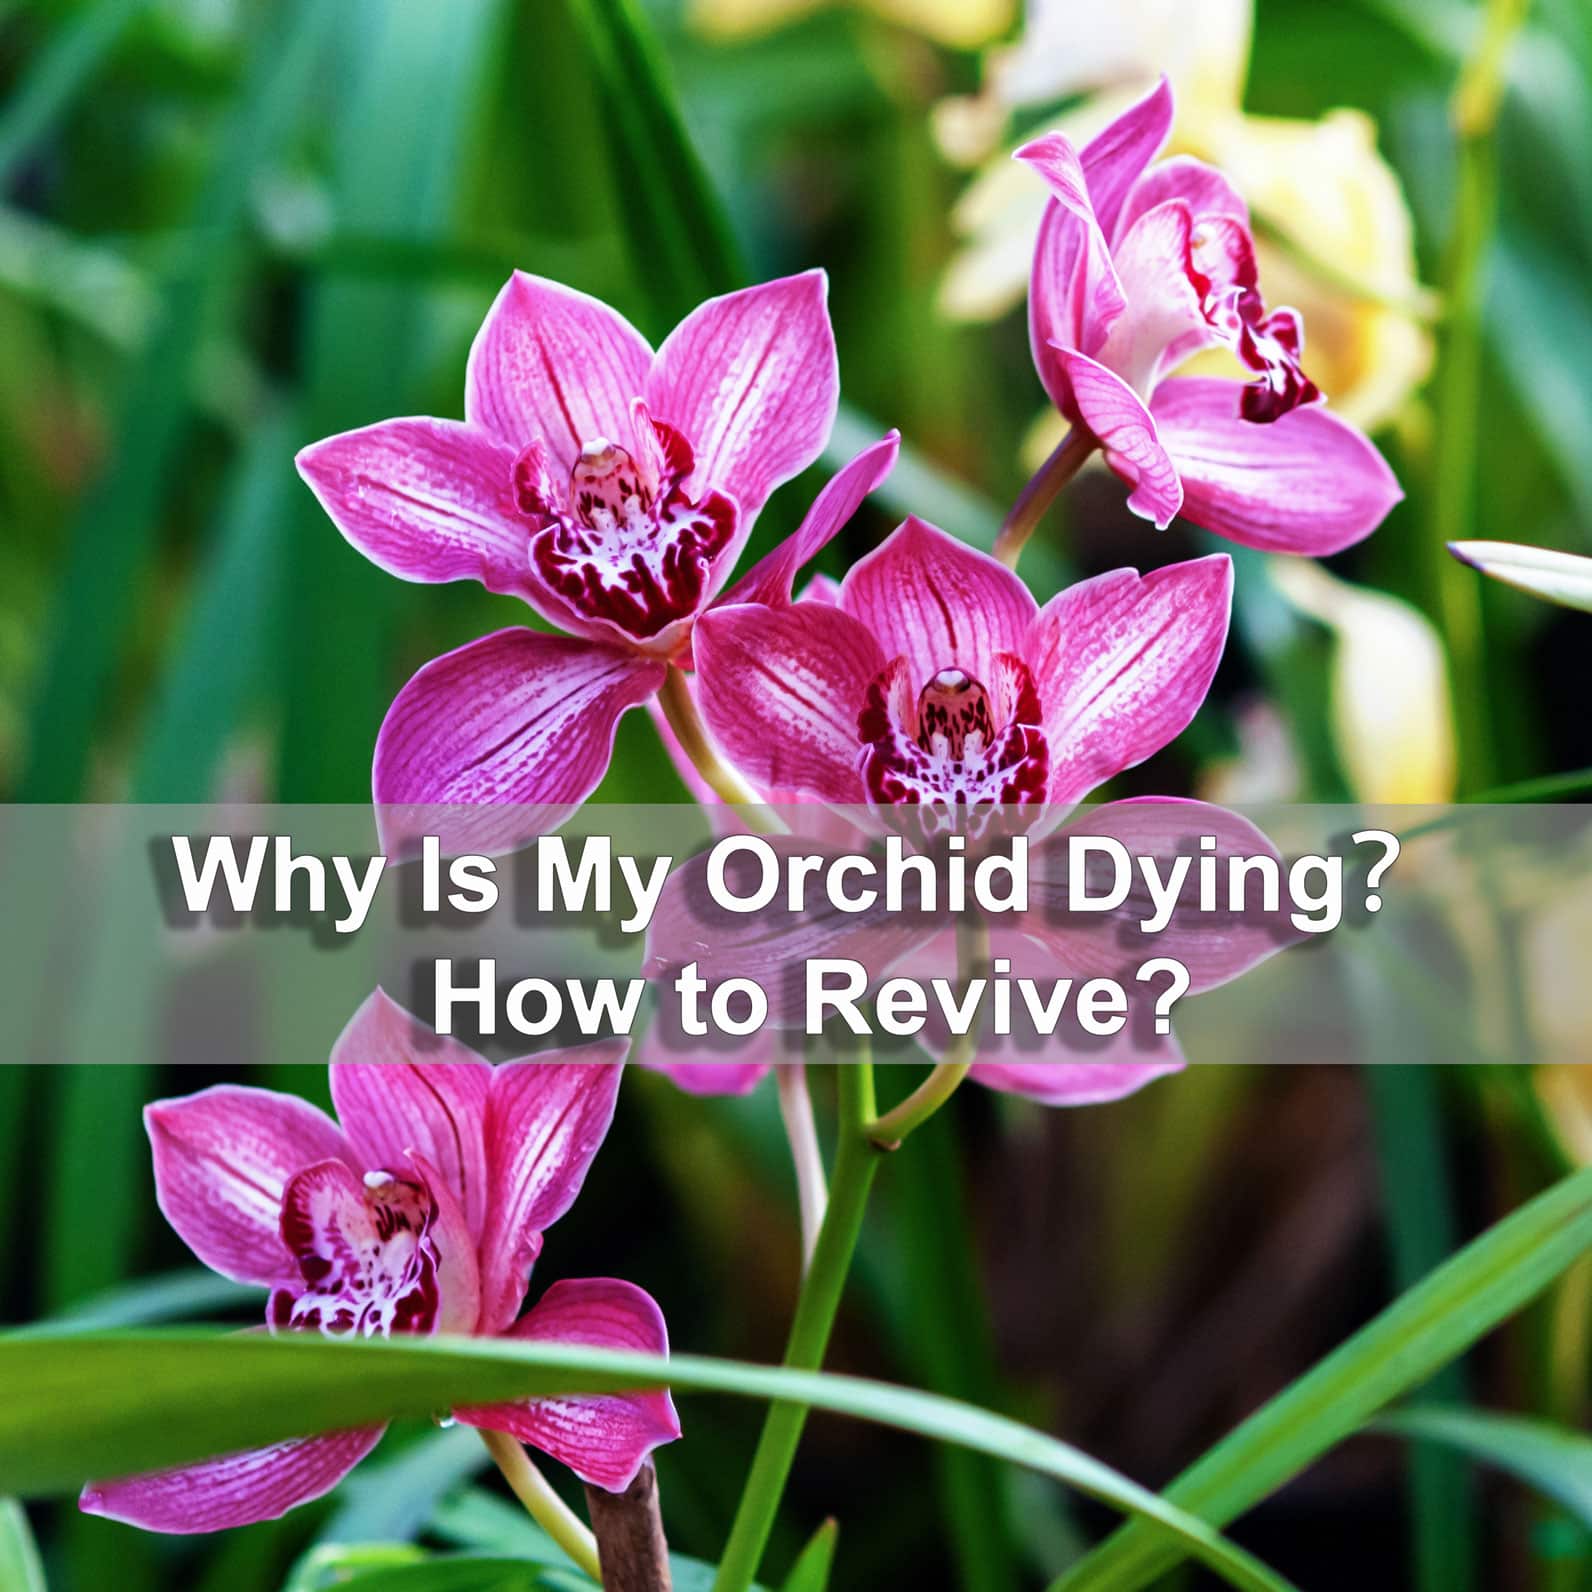 Why-Is-My-Orchid-Dying-and-How-to-Revive